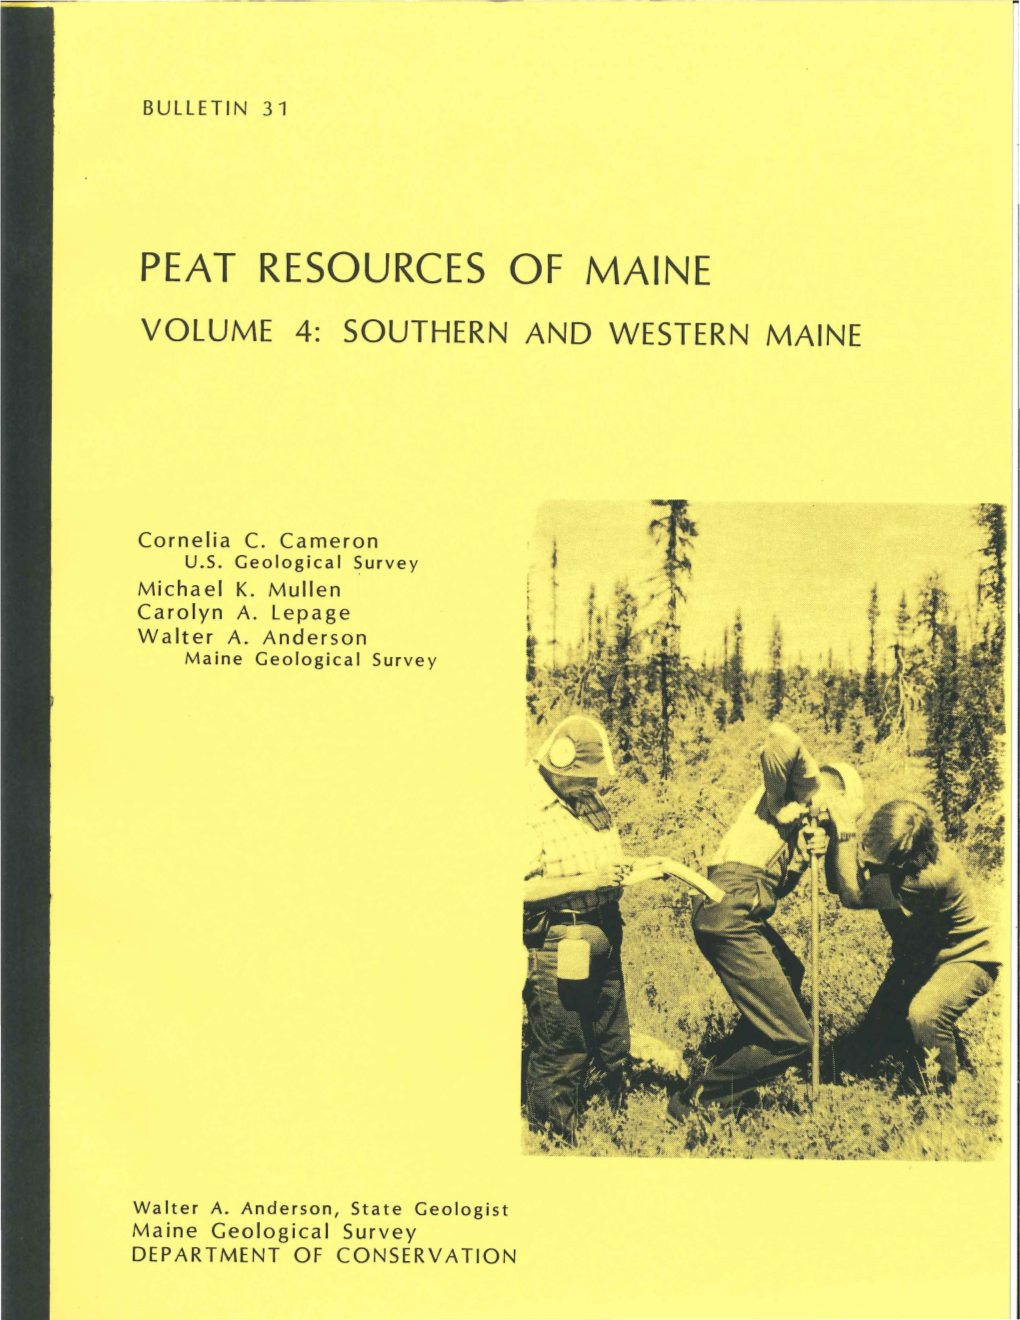 Peat Resources of Maine Volume 4: Southern and Western Maine